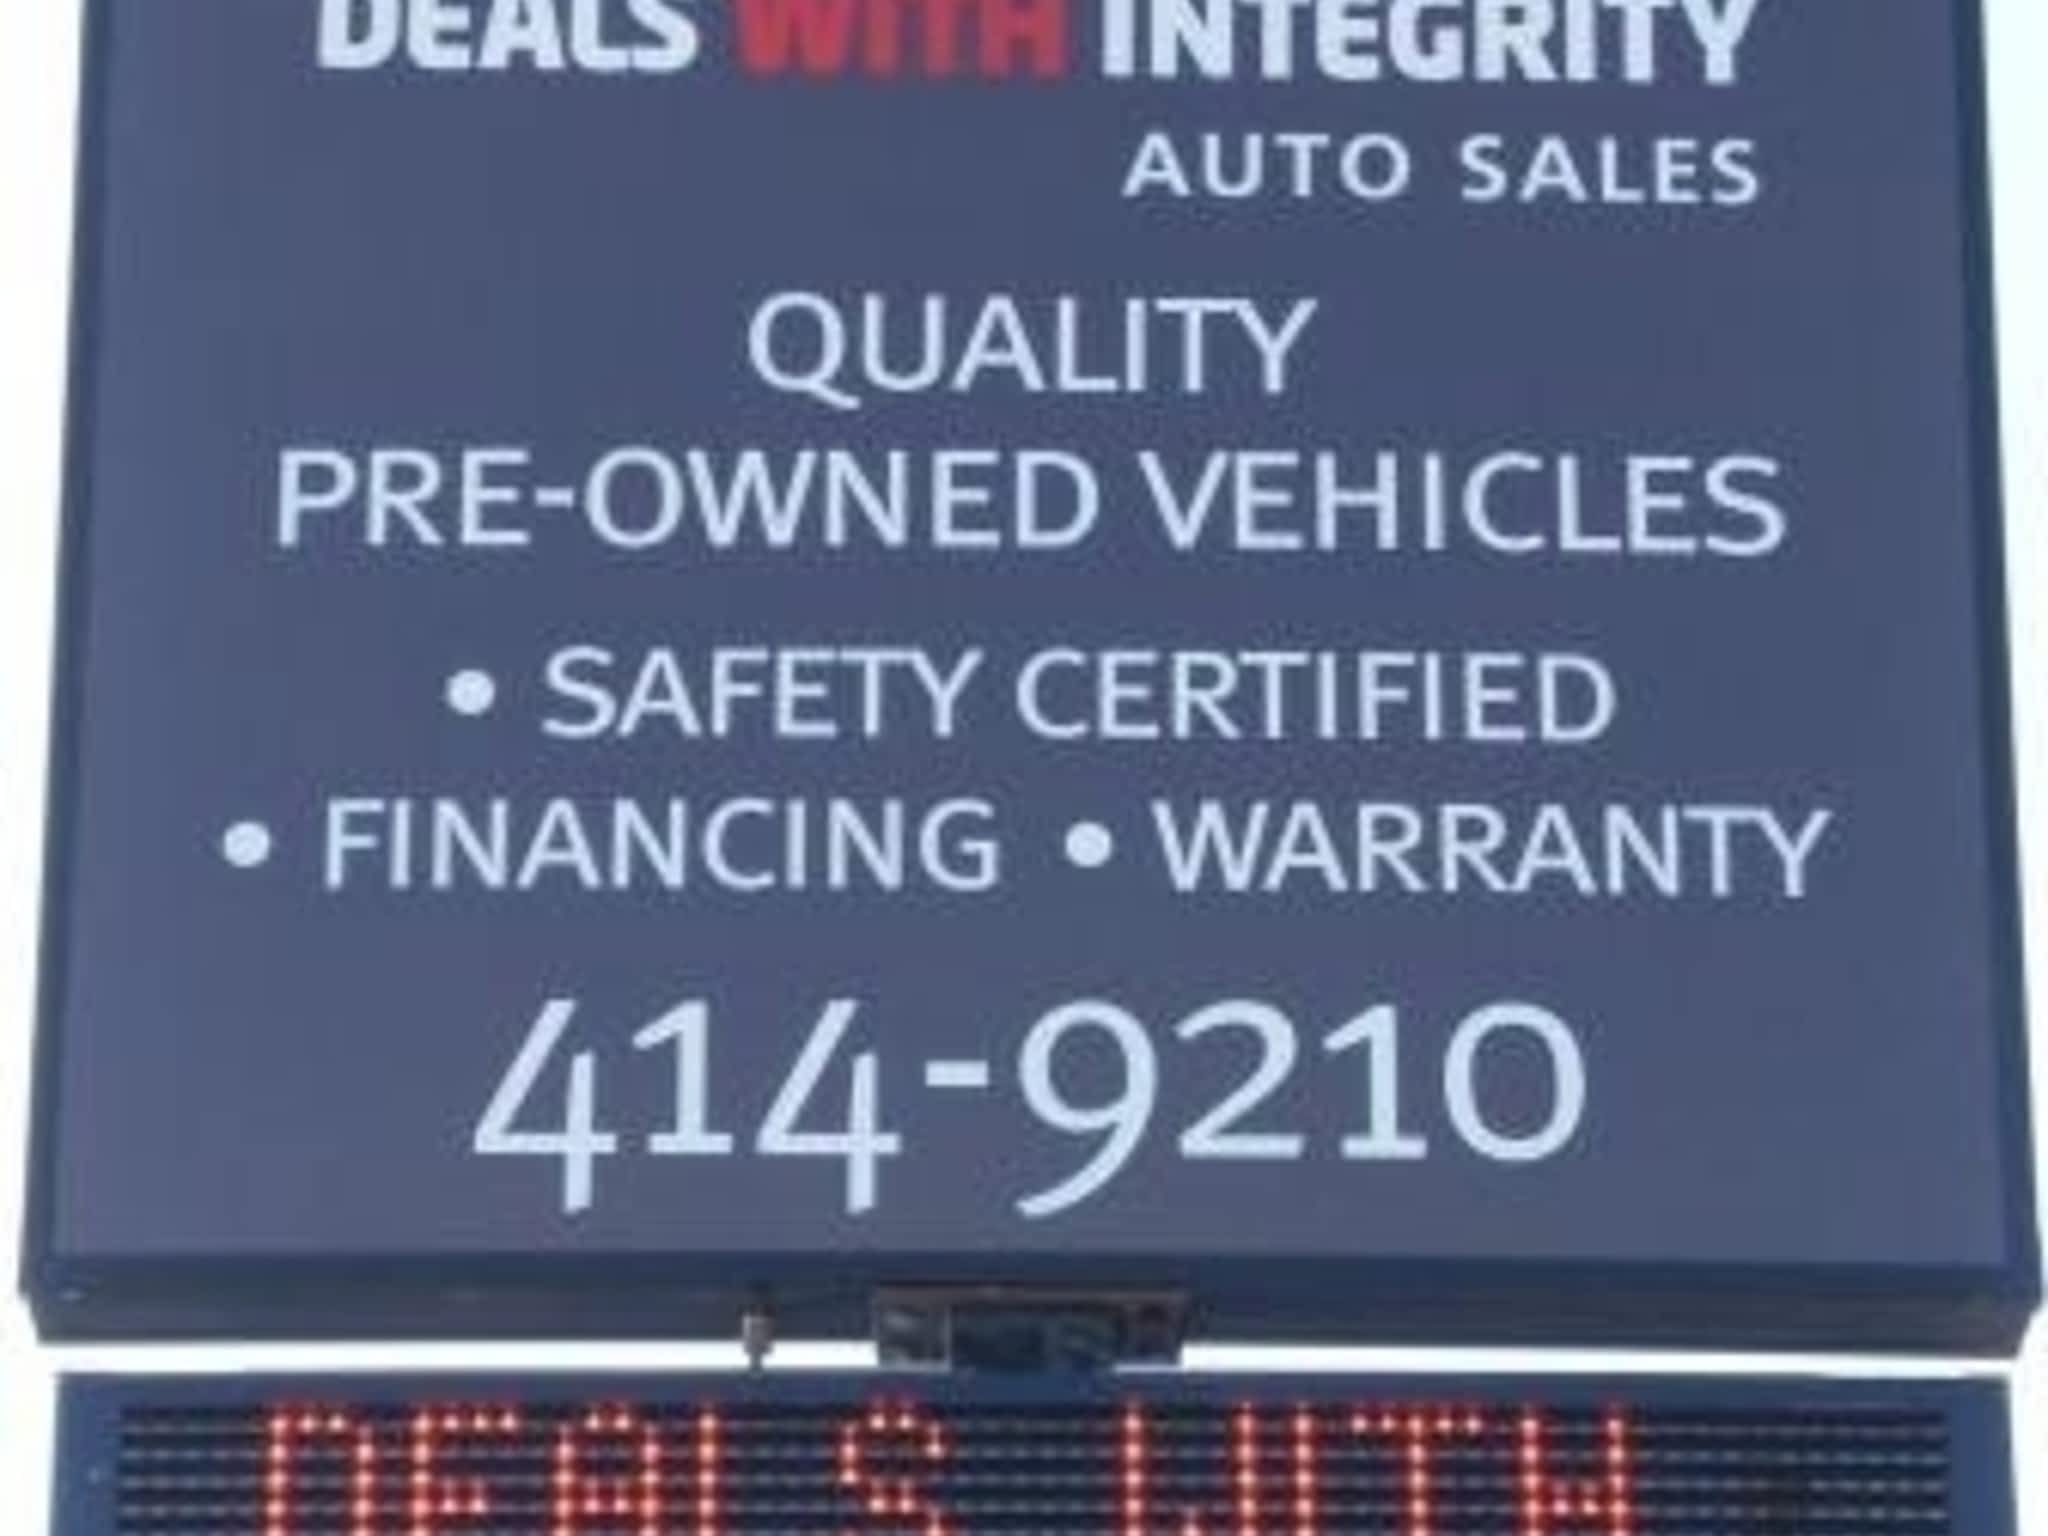 photo Deals With Integrity Auto Sales